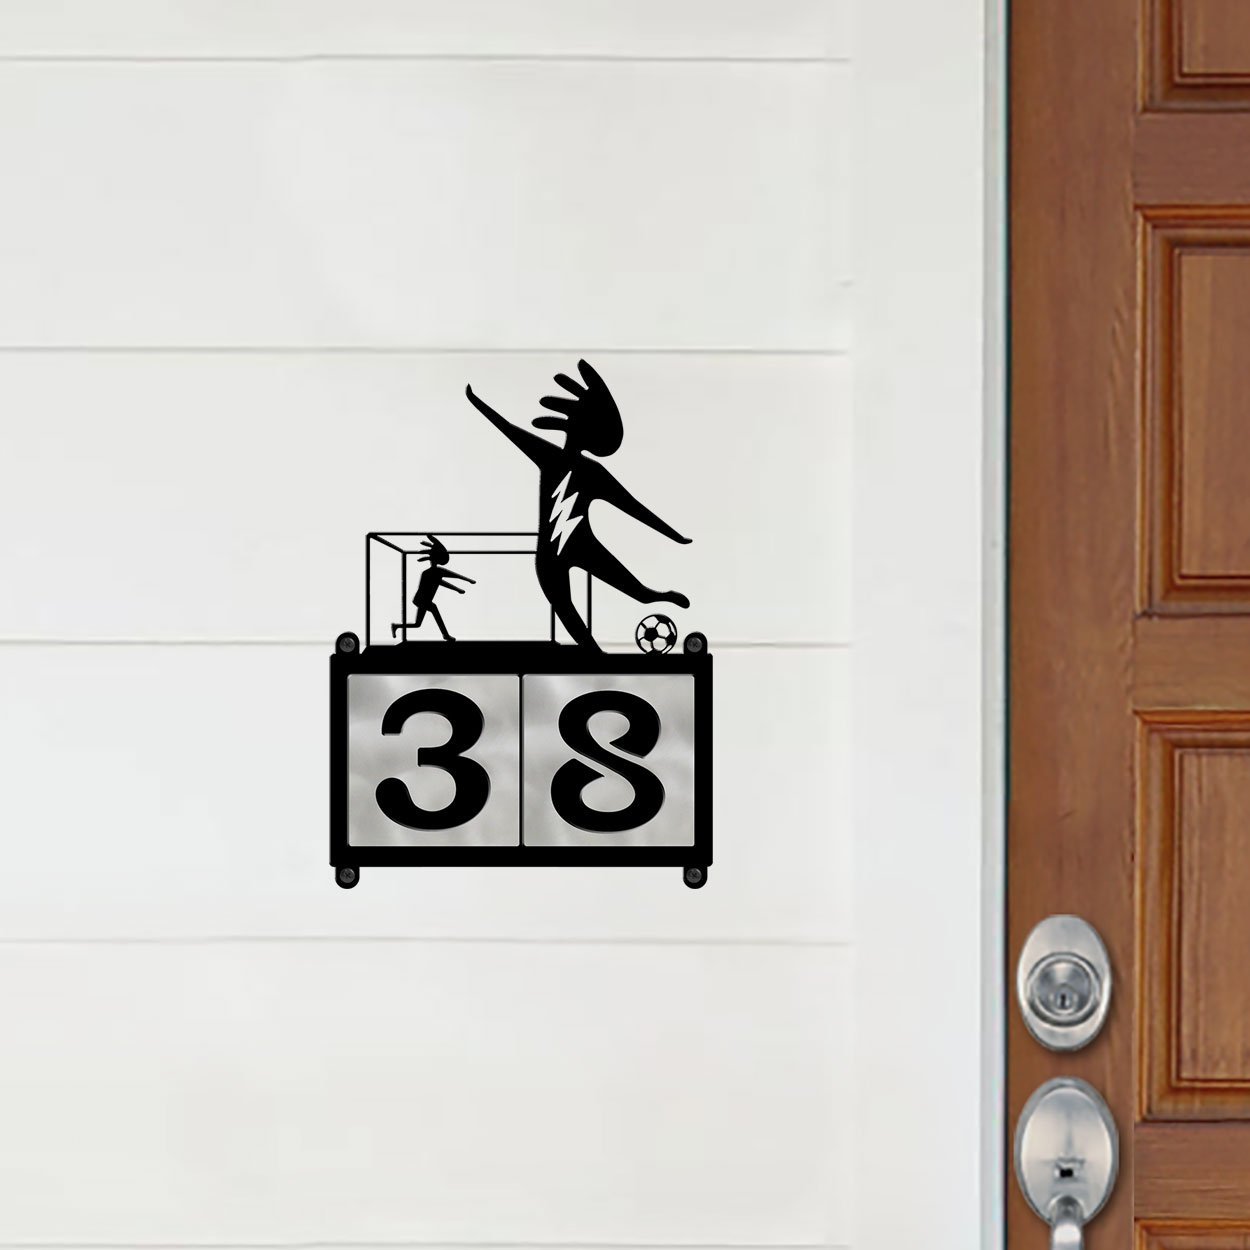 607192 - Kokopelli Soccer Player and Goalie Design 2-Digit Horizontal 4-inch Tile Outdoor House Numbers